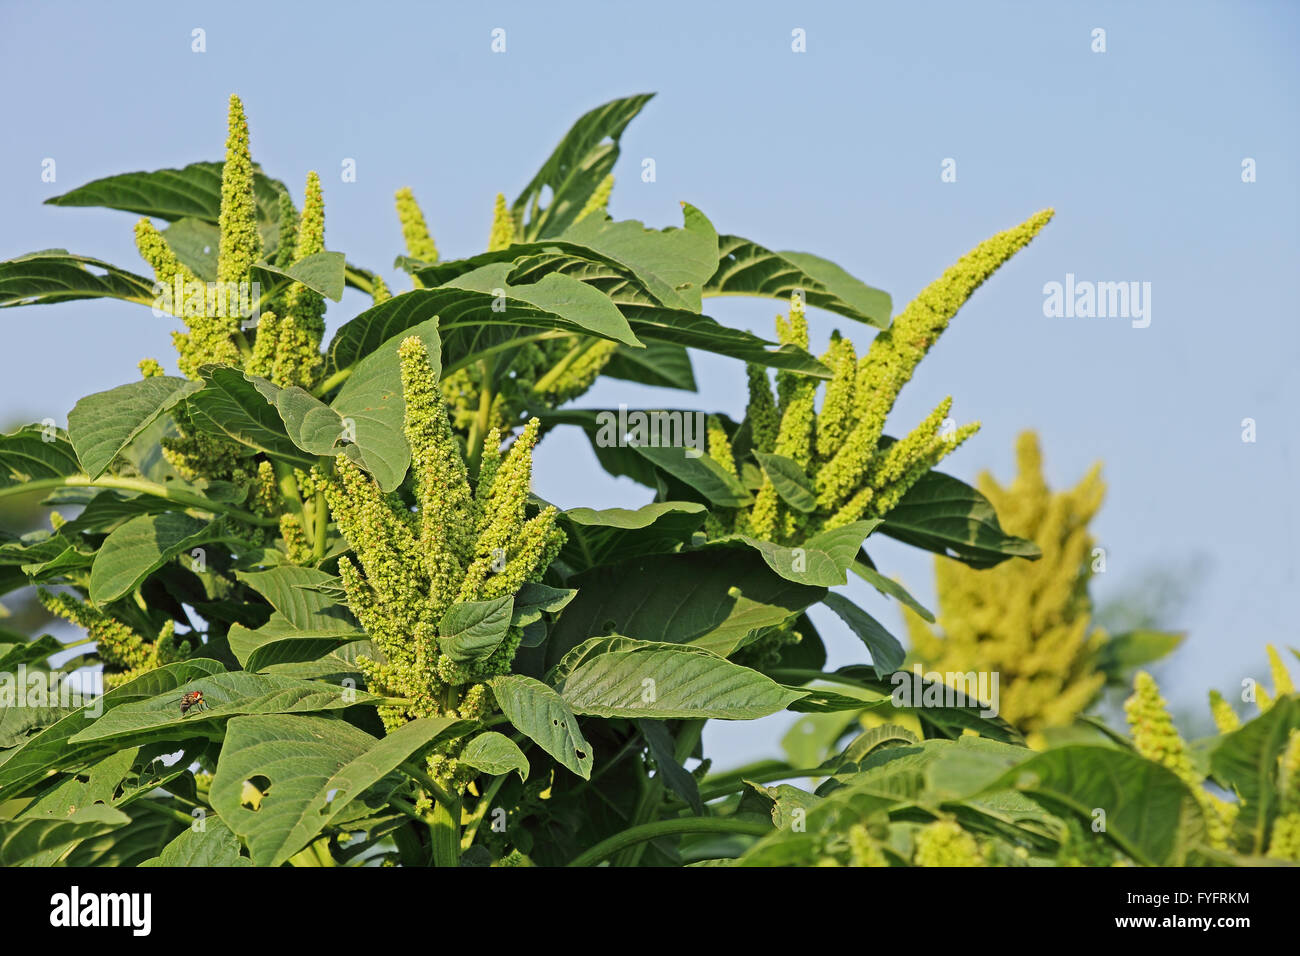 Green Amaranth from India. Cultivated as leaf vegetables, cereals and ornamental plants. Genus is Amaranthus. Stock Photo